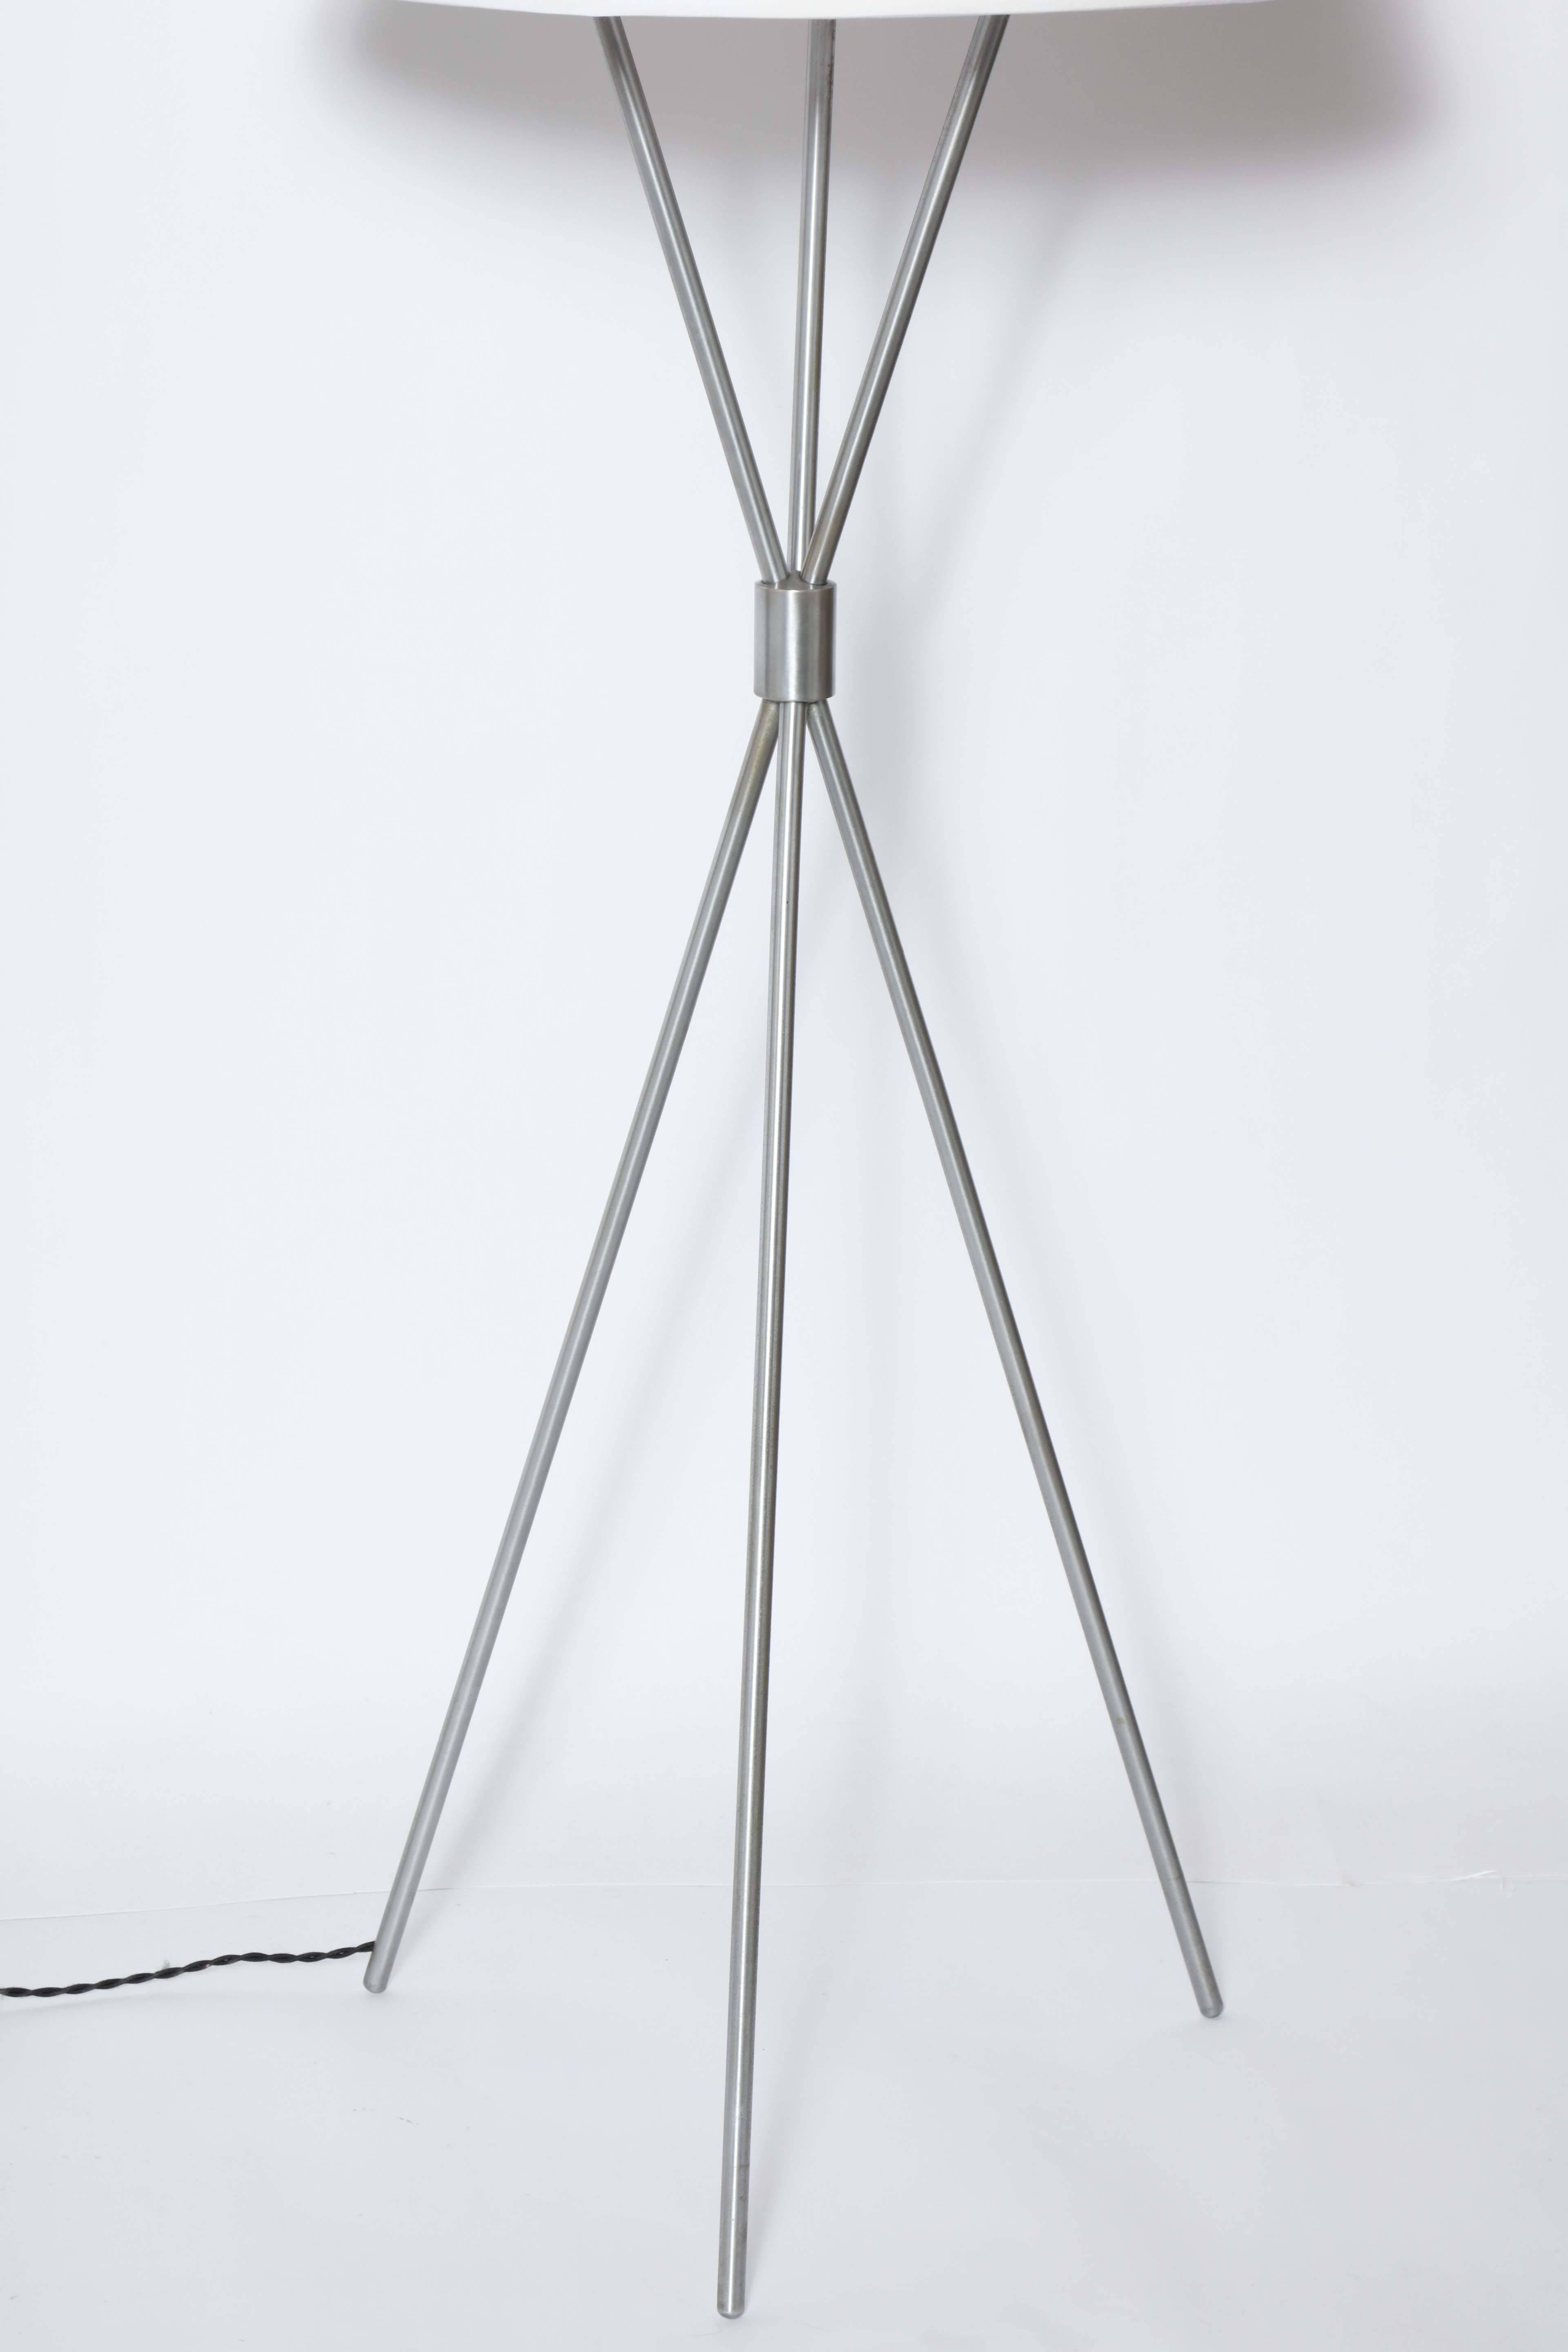 Robsjohn-Gibbings for Hansen Lighting Co. Model 201-M Brushed Nickel Tripod Floor Lamp, Early 1950's.  Featuring Brushed Nickel and Nickel Plate tripod legs, cylindrical clasp and new (9H x 20D) White Parchment Lampshade covering original frame.